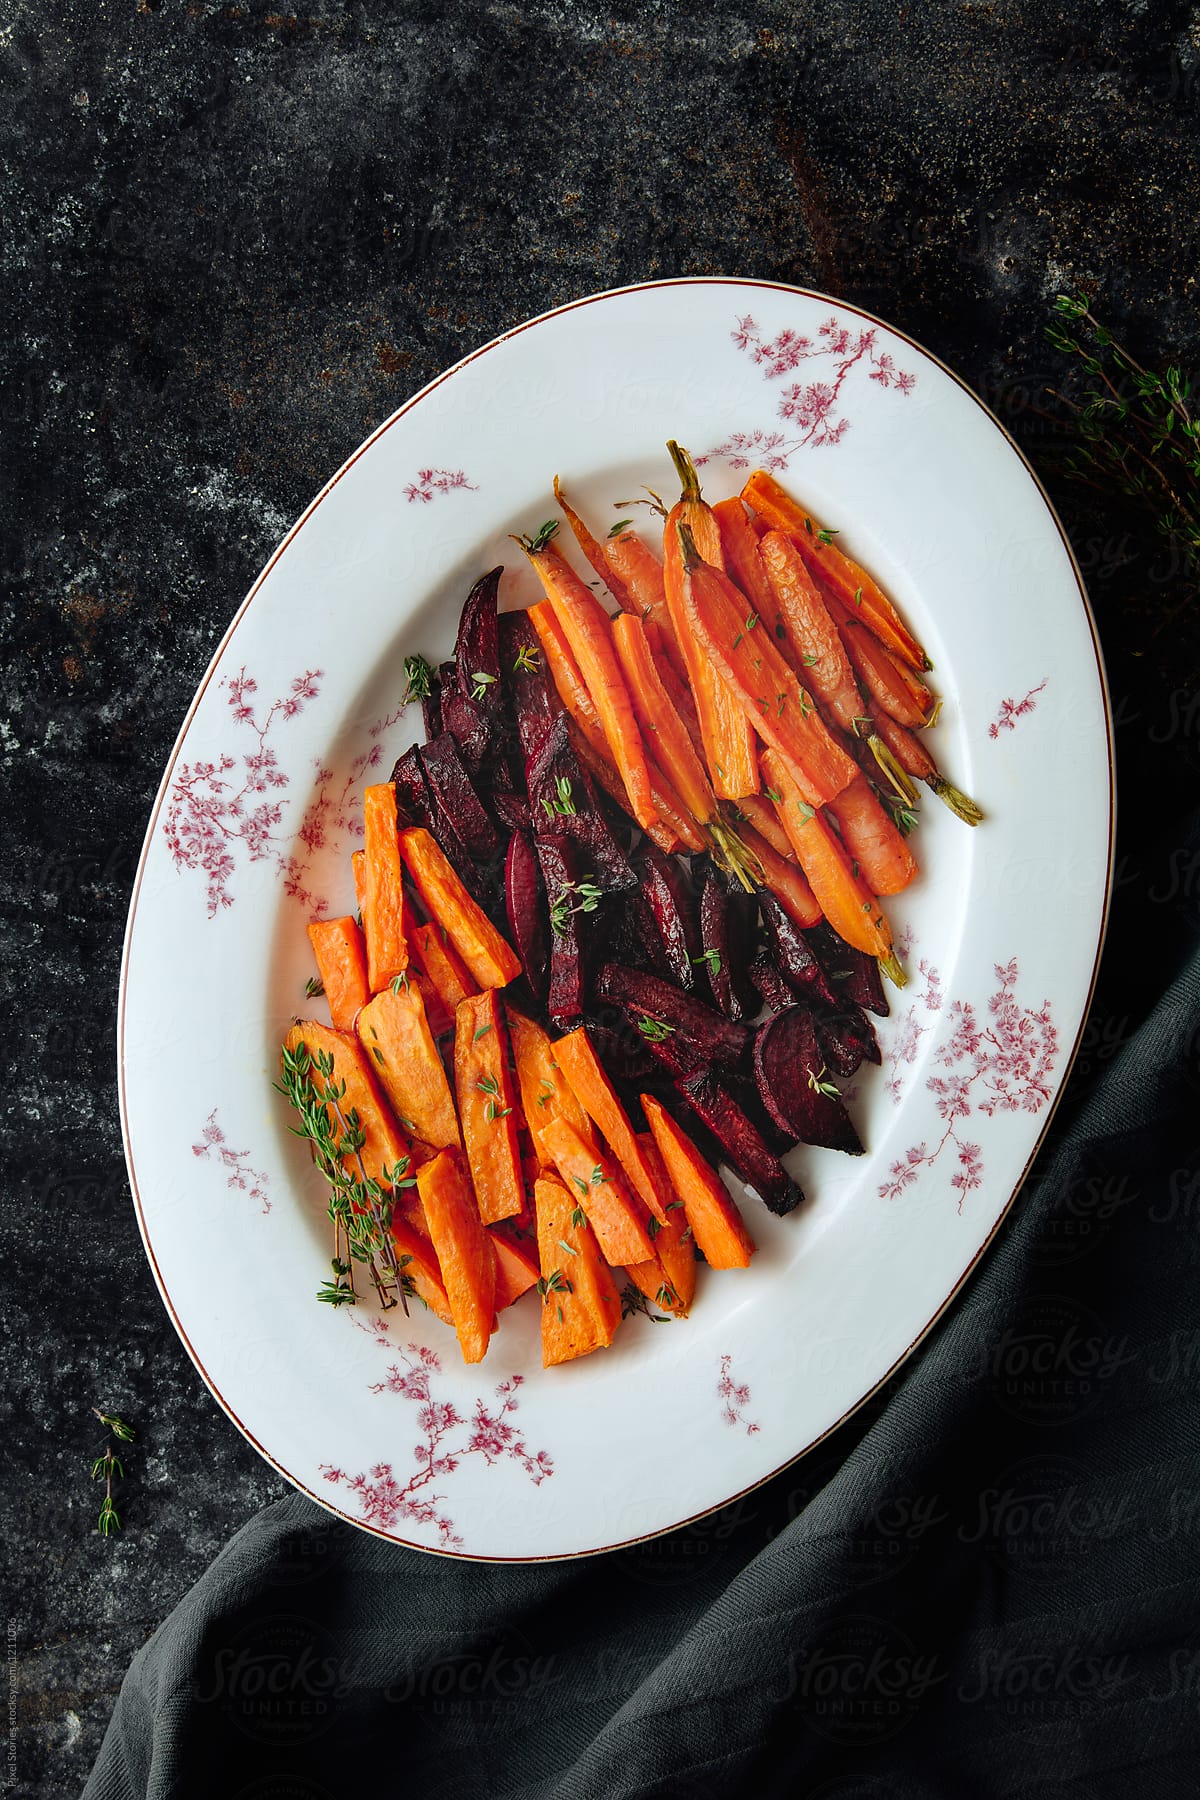 Baked sweet potatoes, beet and carrots with thyme salad